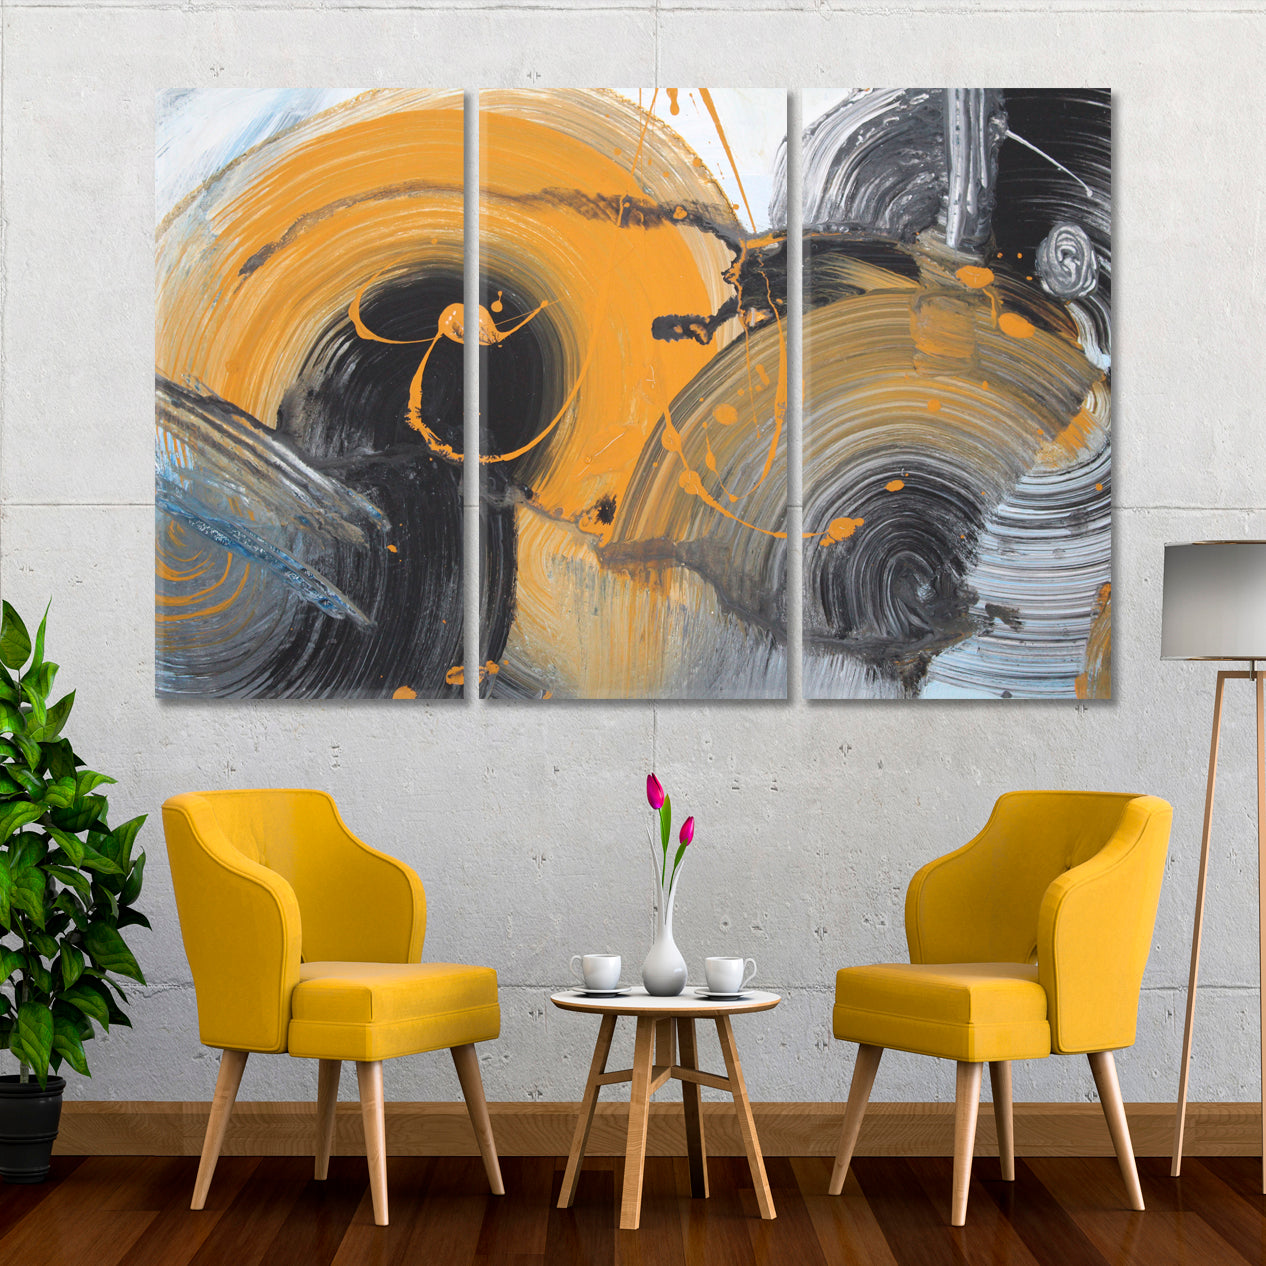 Black Grey White Yellow Colors Brushstrokes Abstract Trendy Style Contemporary Art Artesty 3 panels 36" x 24" 